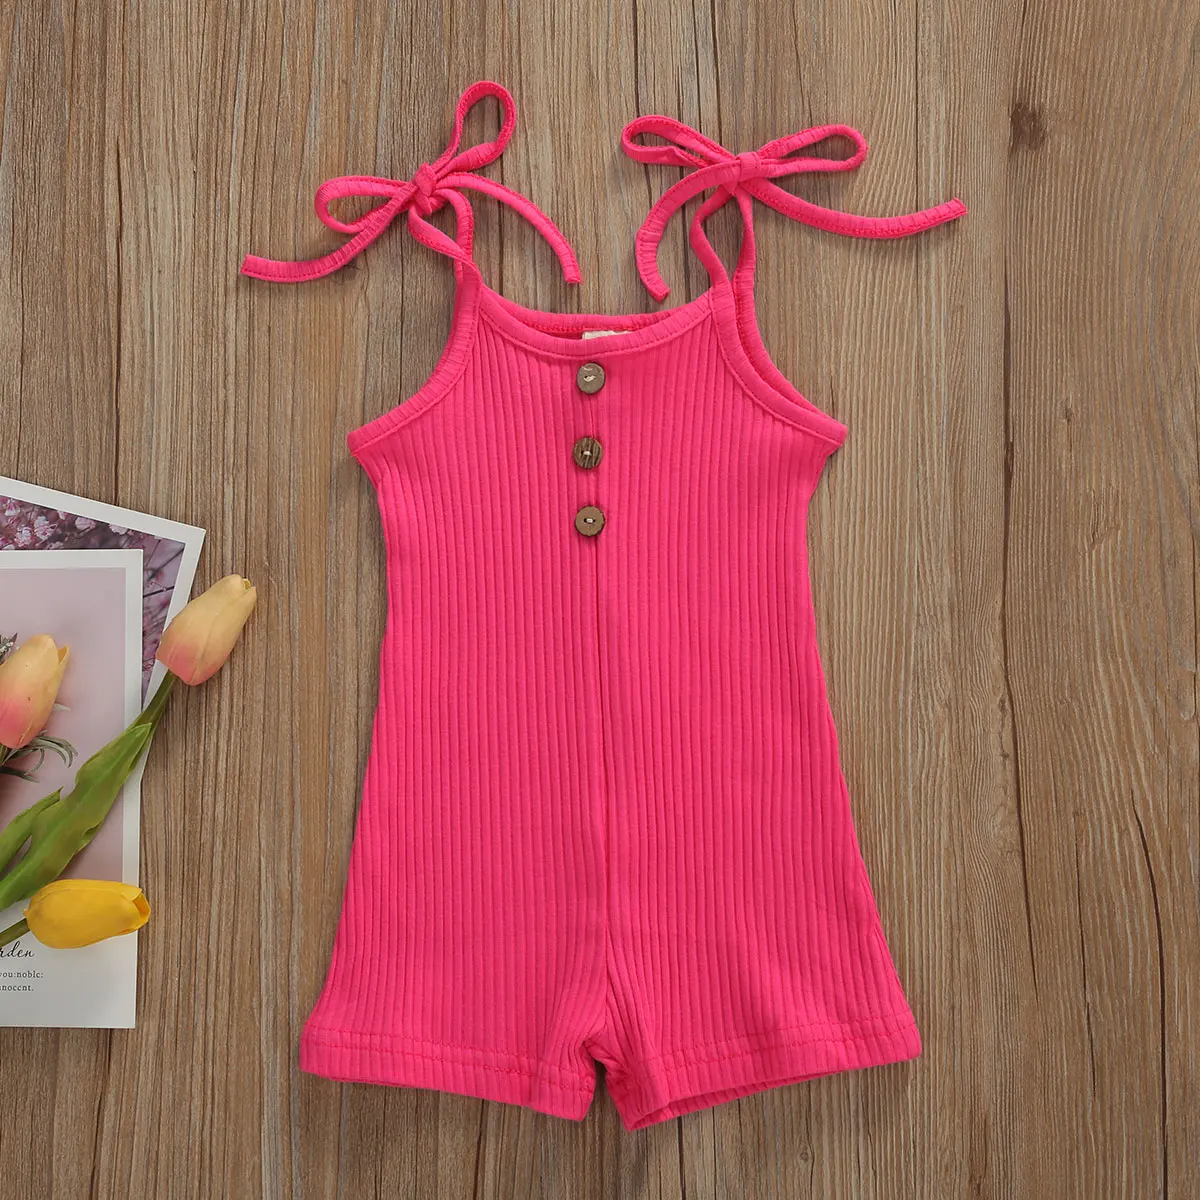 

Pudcoco Newborn Baby Girl Clothes Summer Solid Color Knitted Cotton Sleeveless Sling Romper Jumpsuit One-Piece Outfit Sunsuit